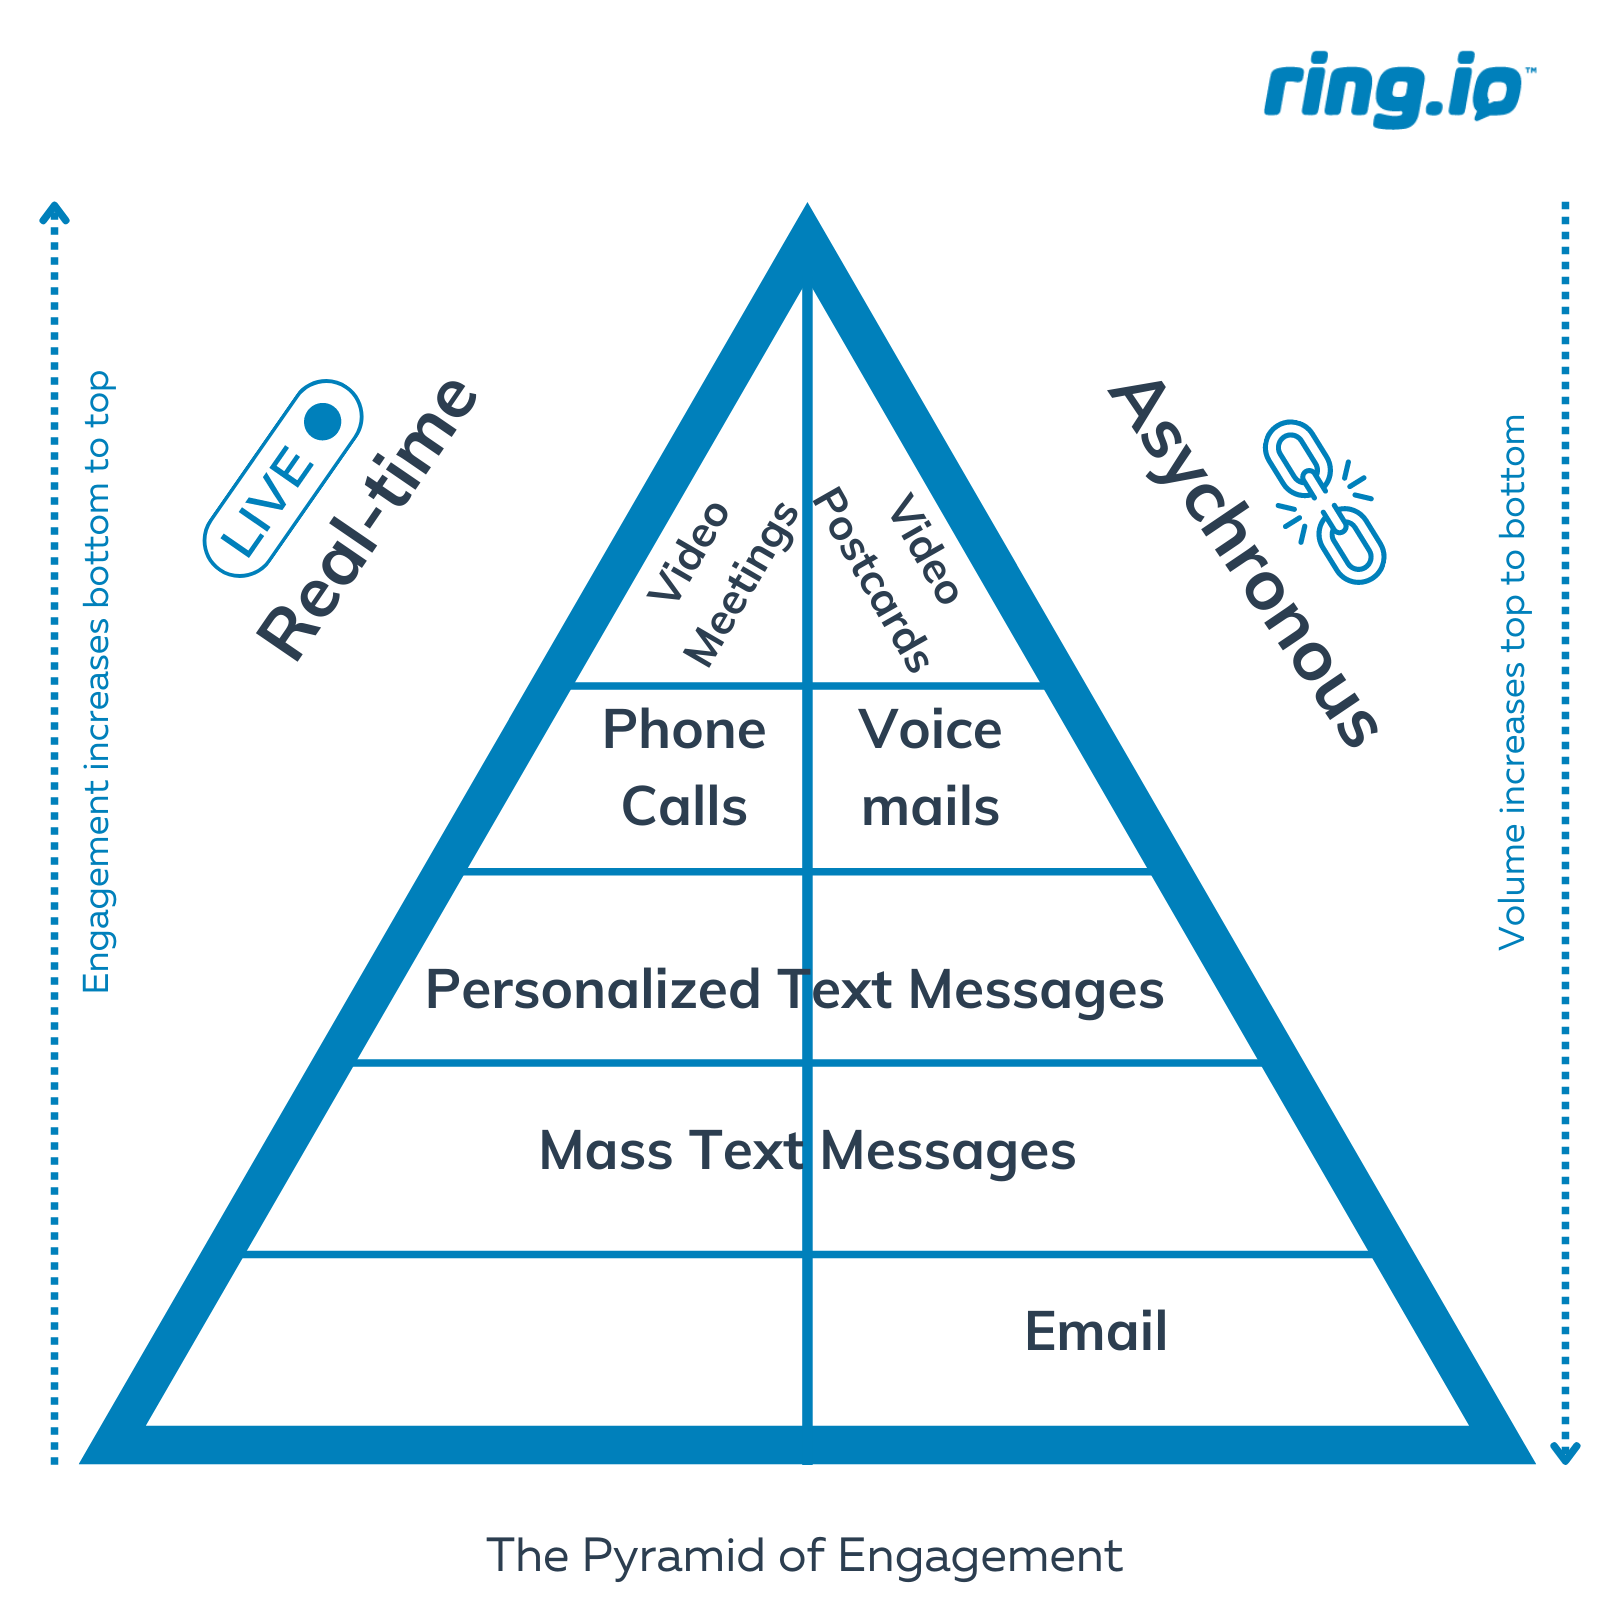 The pyramid of engagement